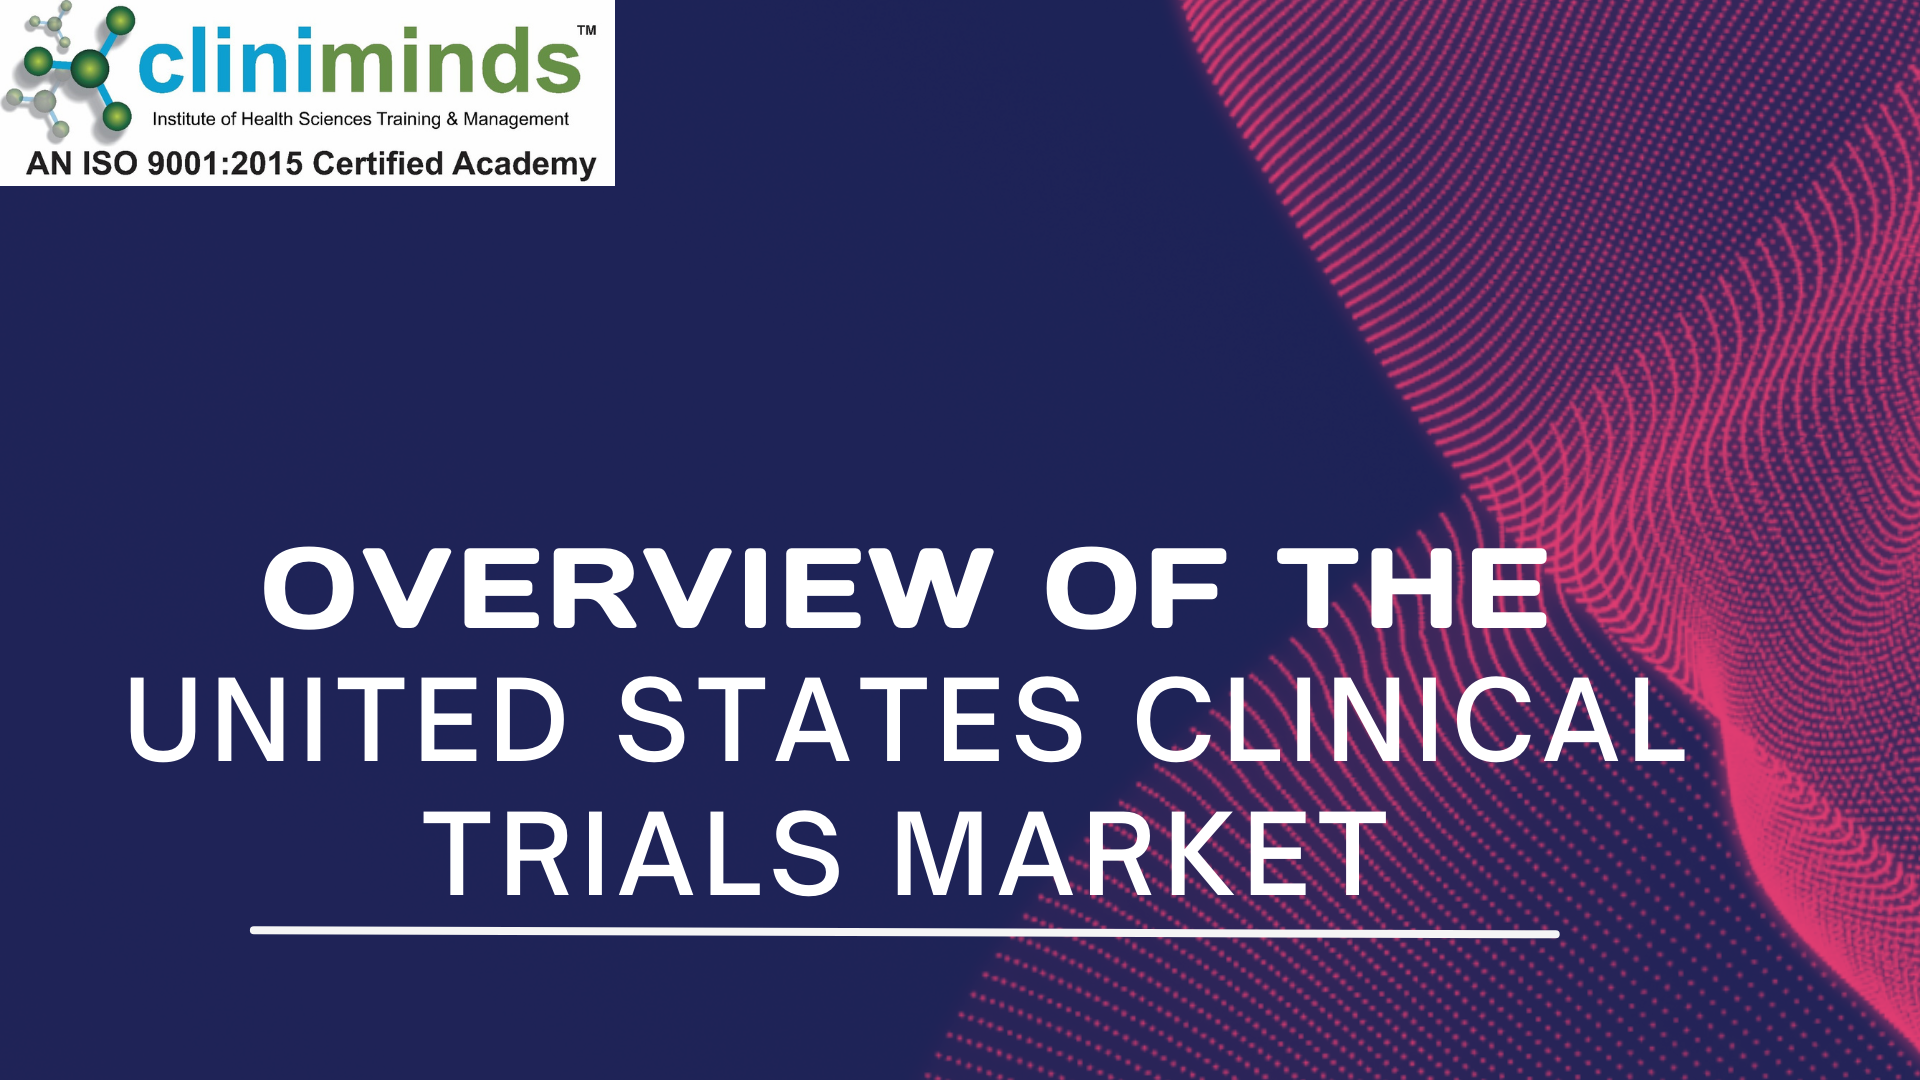 Overview of the United States Clinical Trials Market